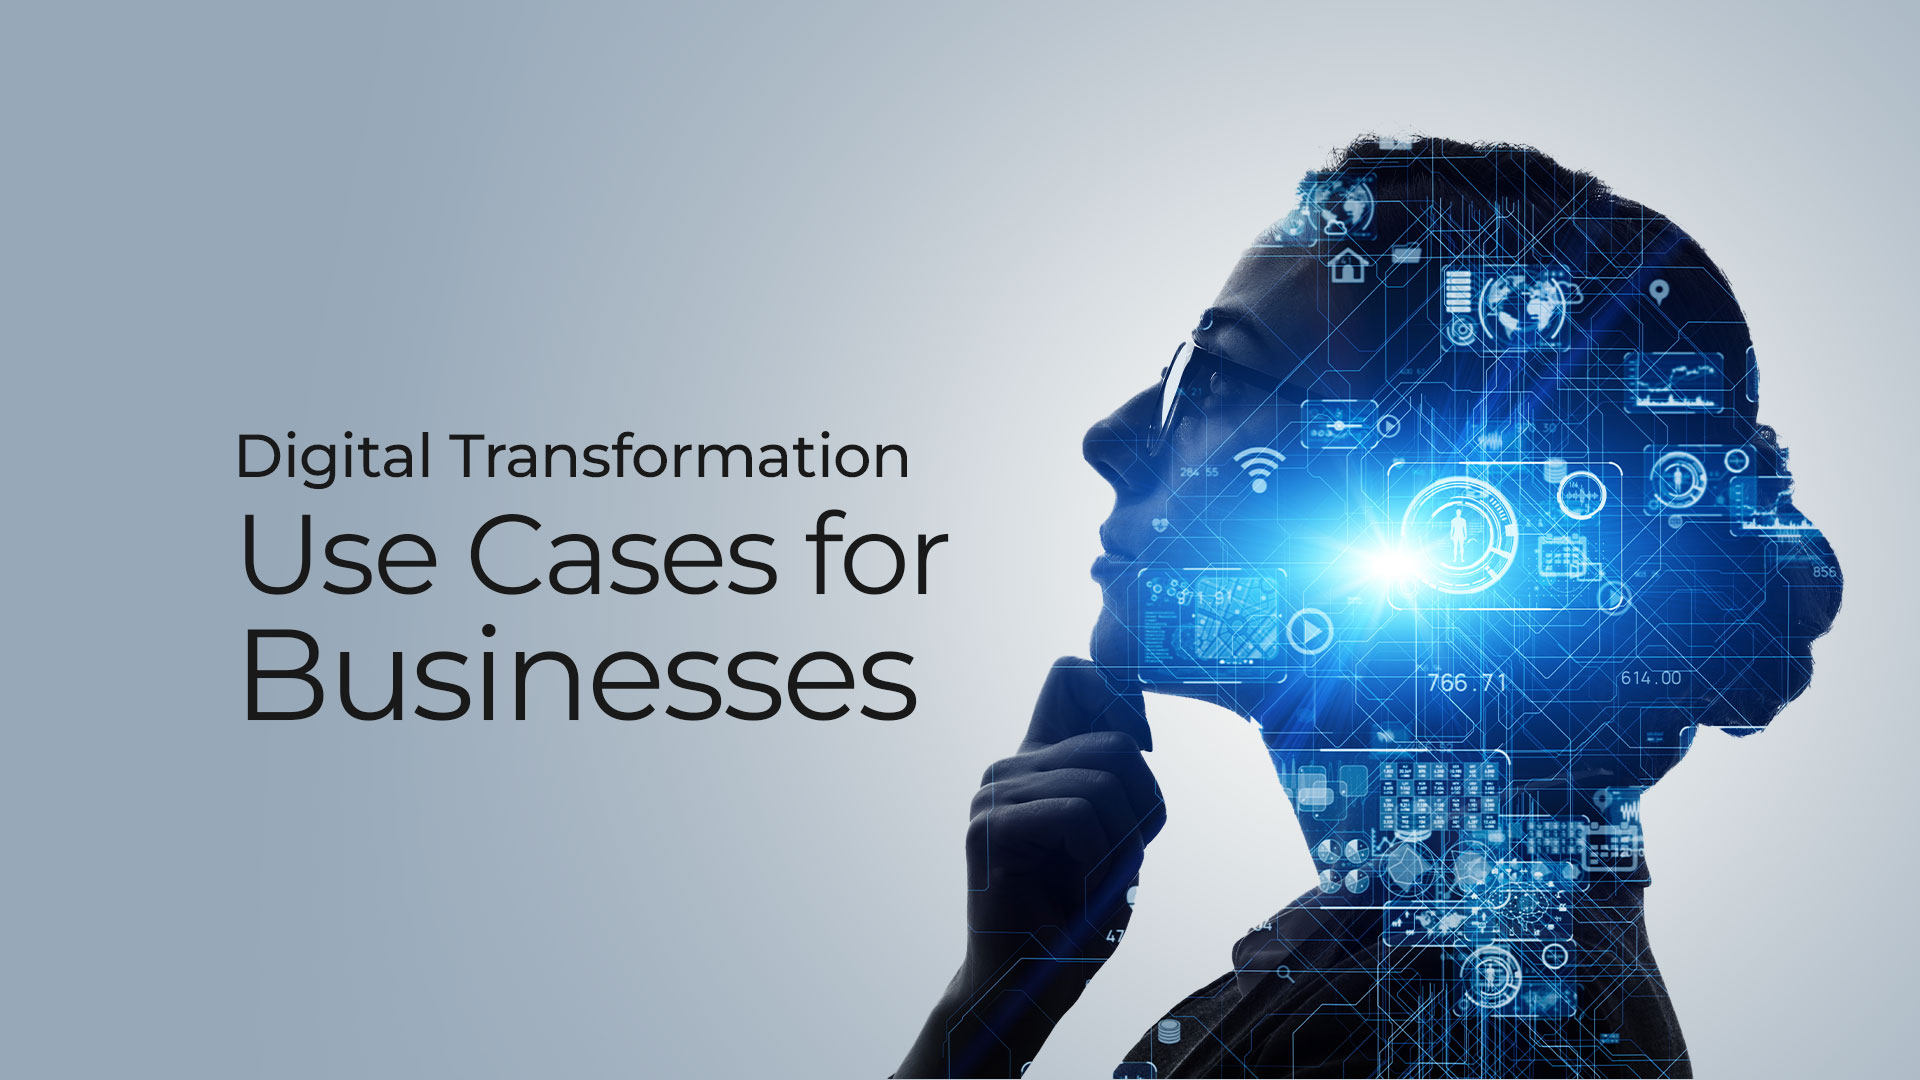 Digital Transformation Use Cases for 14 Businesses